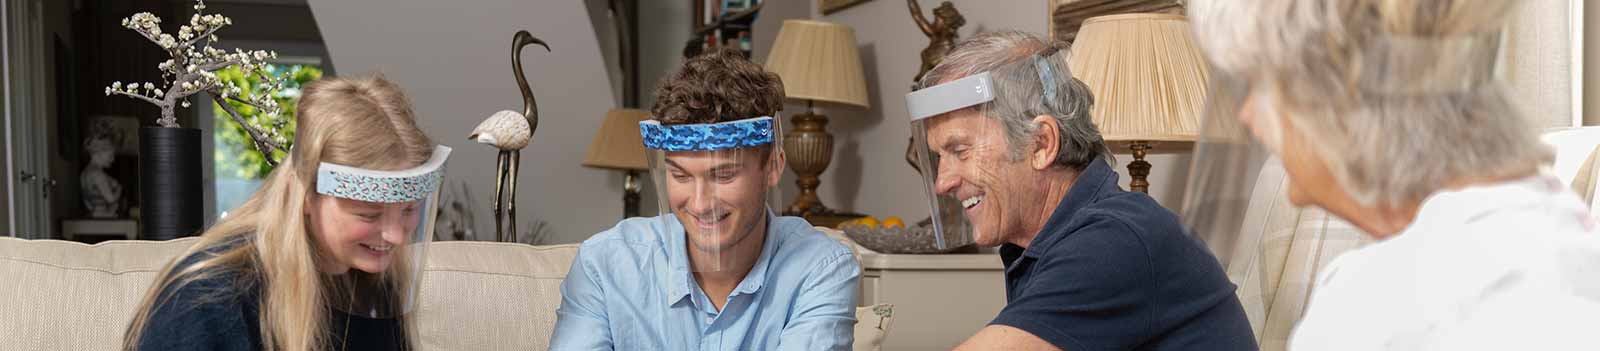 Family of four chatting in a living room wearing the Medworx face visors with a variety of patterned stickers. 